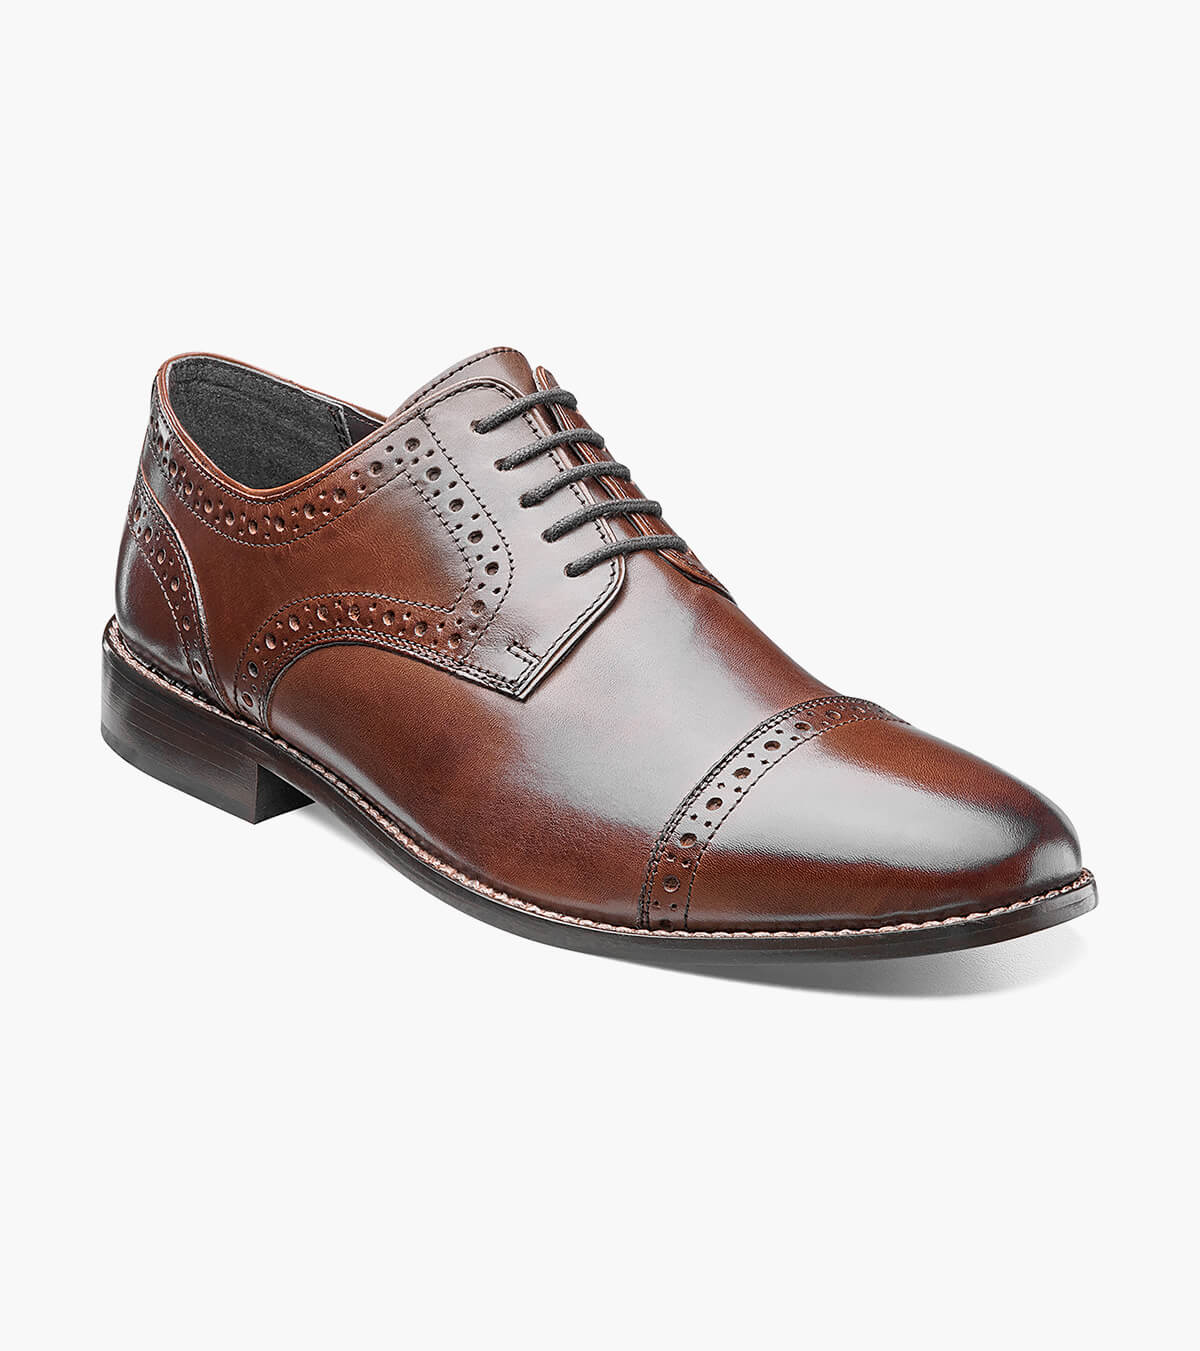 Norcross Cap Toe Leather Casual Oxford